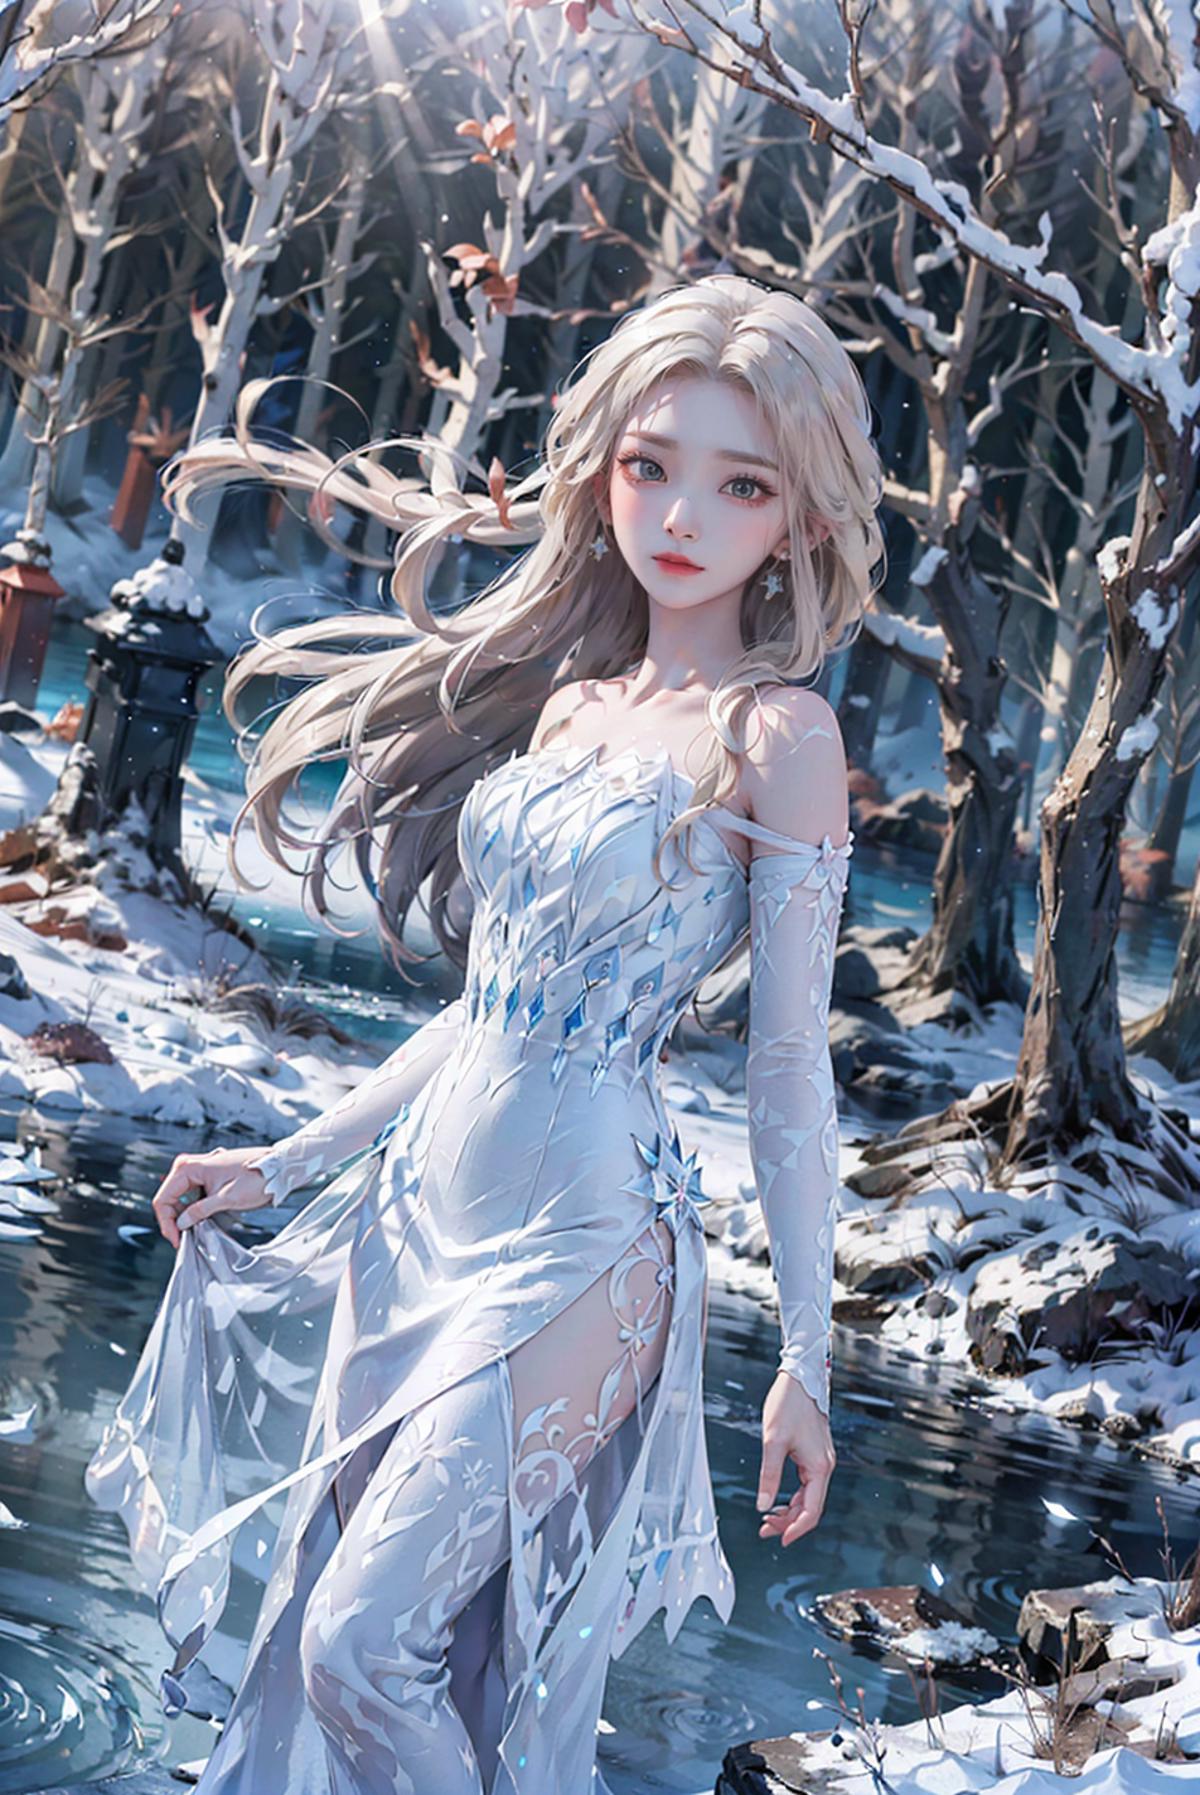 A beautiful illustration of a woman in a white dress with blonde hair, standing in a snowy environment.